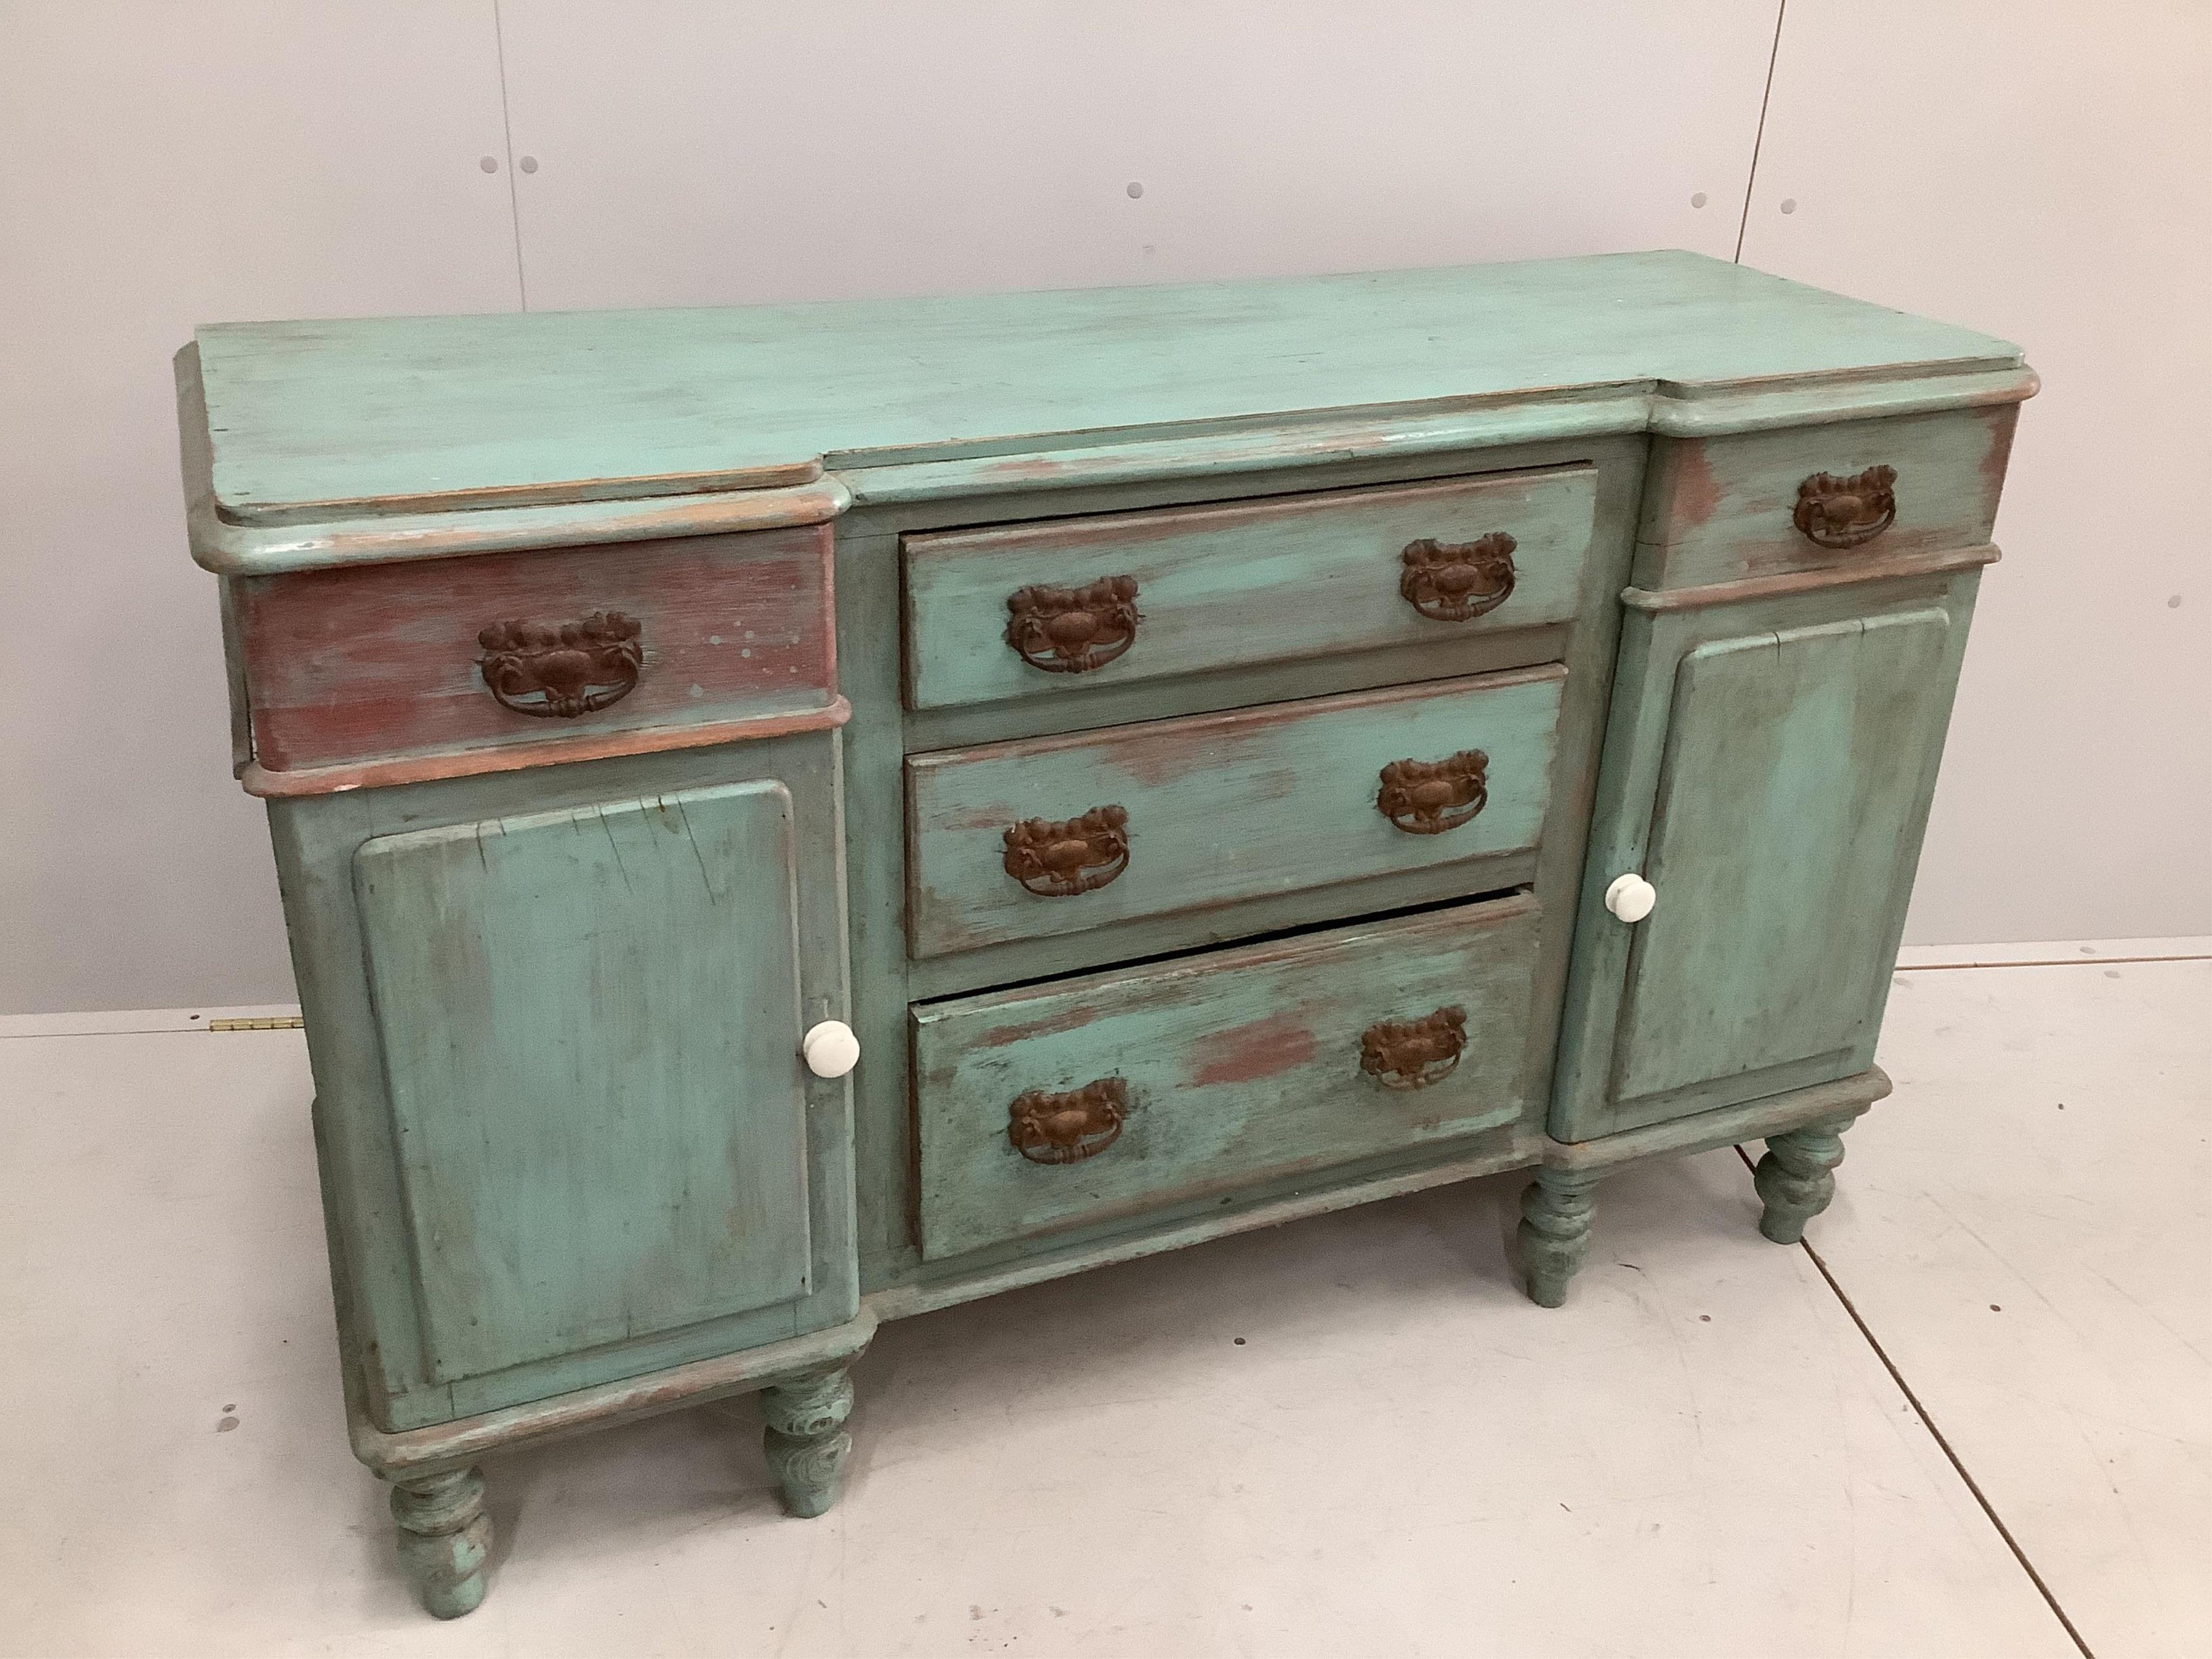 A Victorian style painted pine inverse breakfront low dresser, width 137cm, depth 47cm, height 88cm. Condition - fair